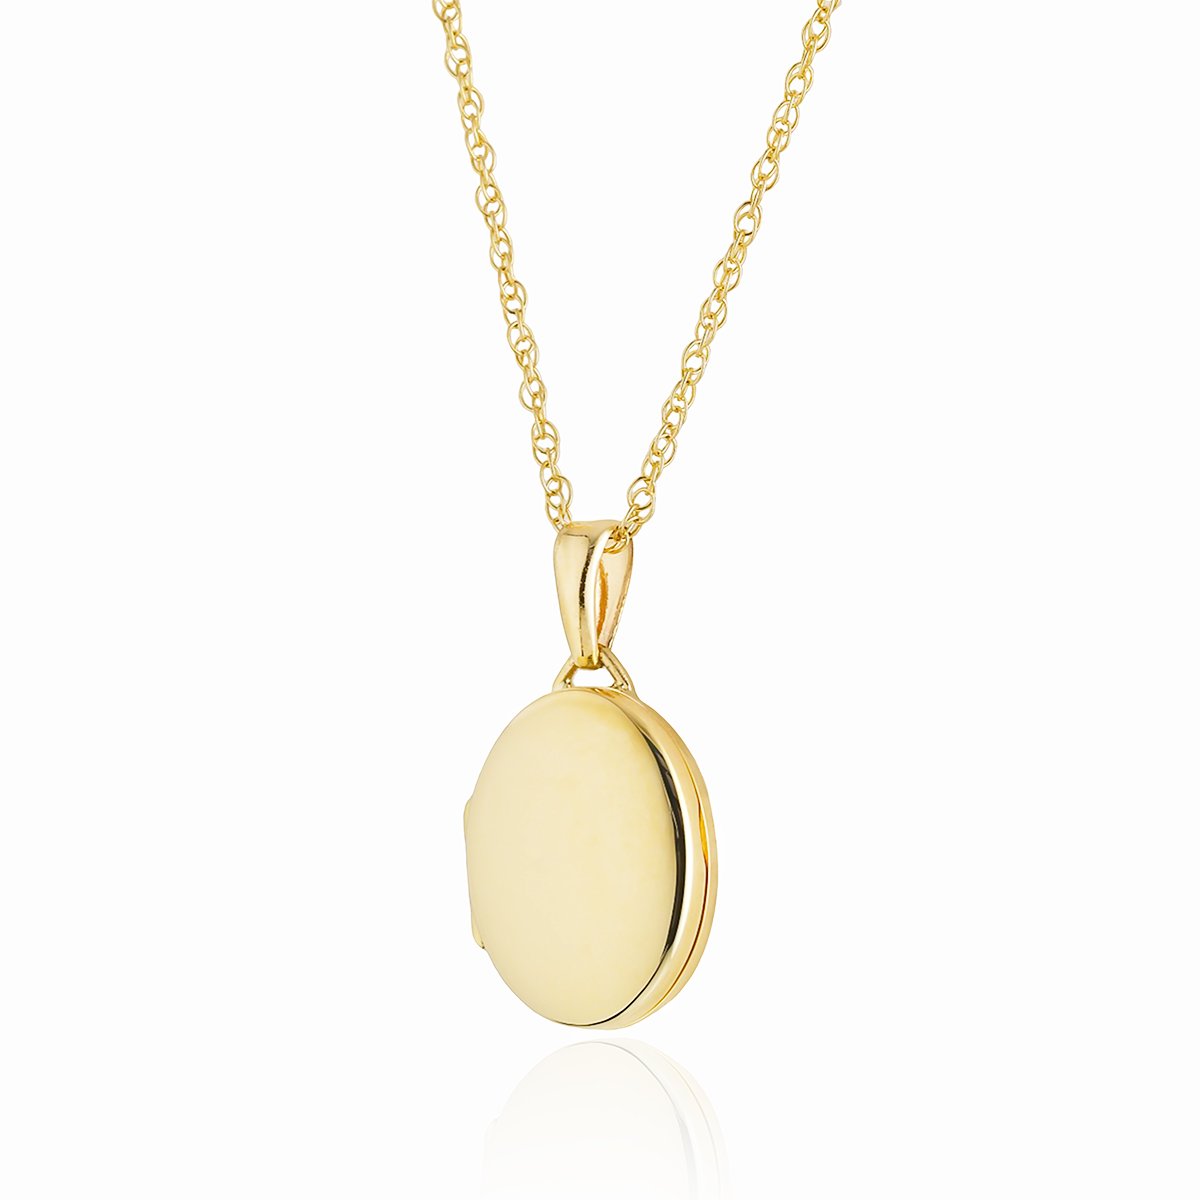 9 ct gold polished oval locket on a 9 ct gold rope chain